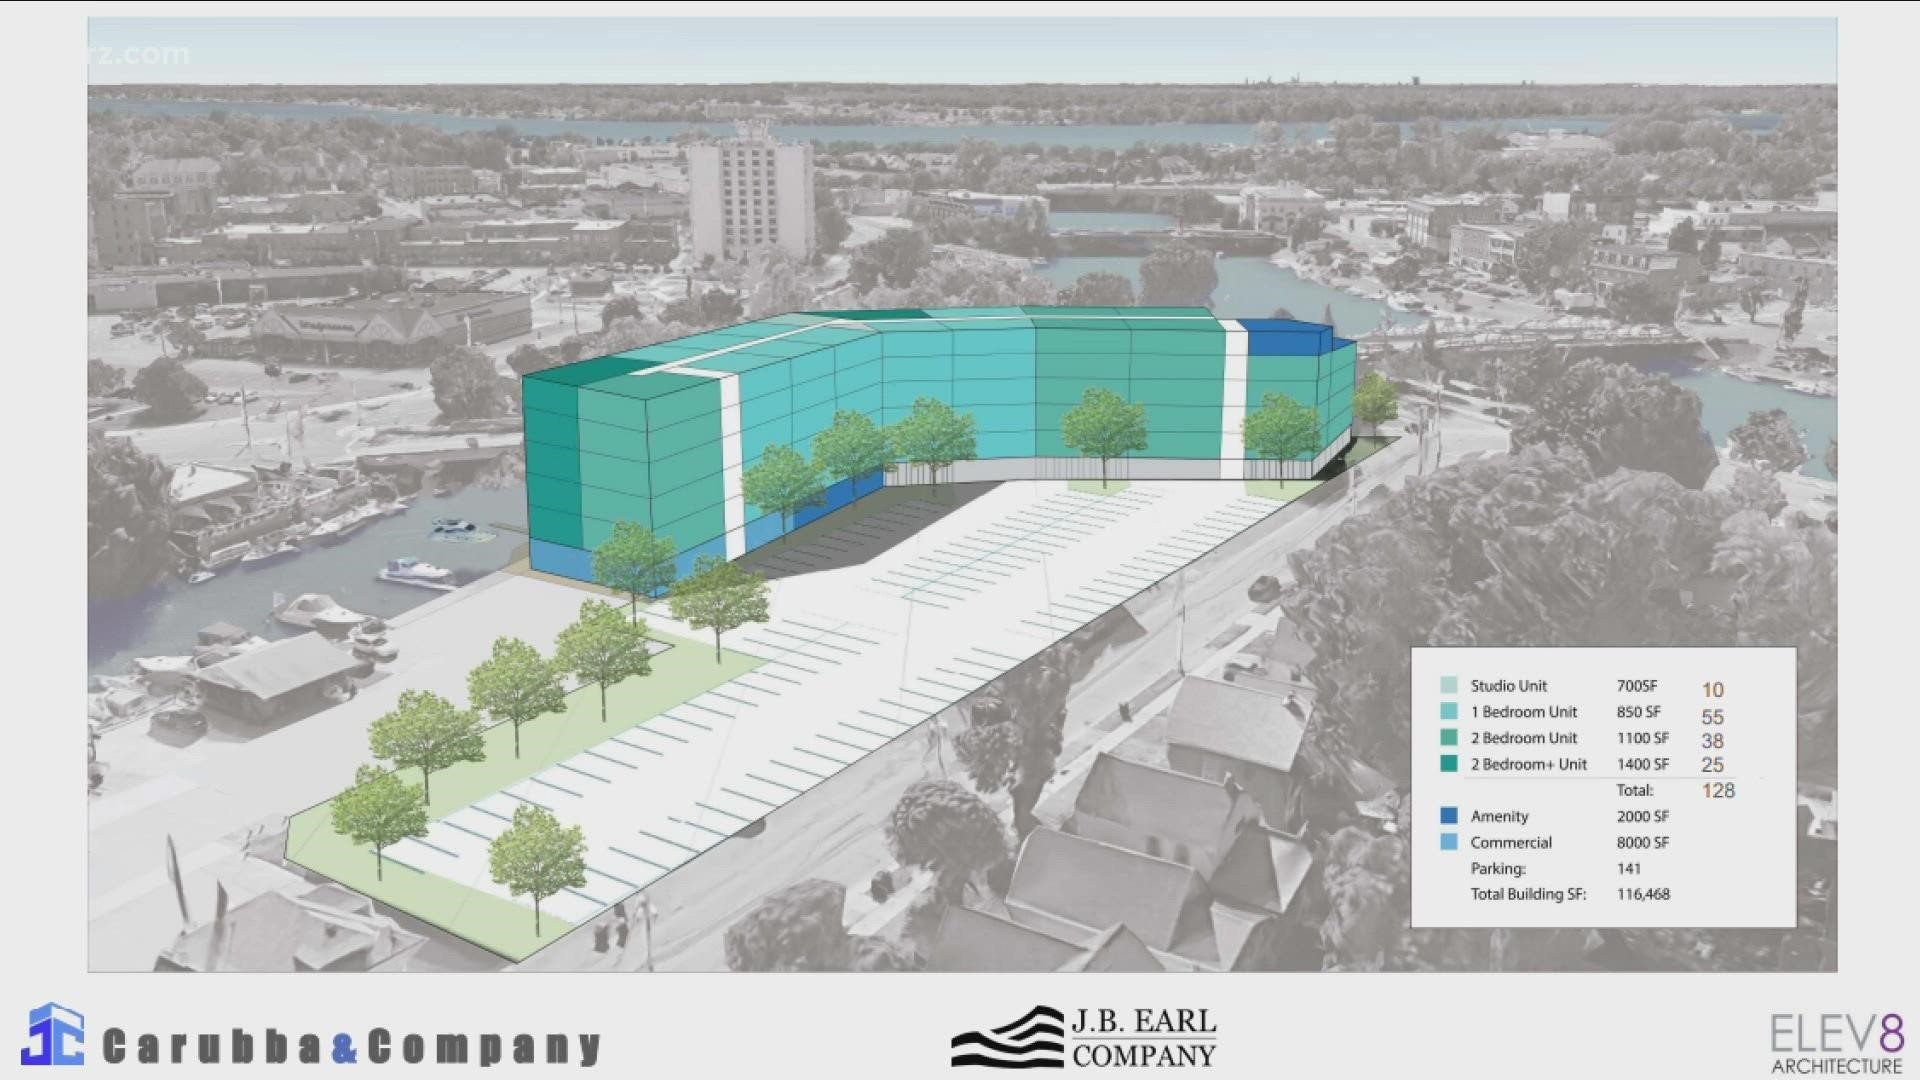 After the successful waterfront development, Tonawanda is expecting another development project in the works with a six story complex in the mix.